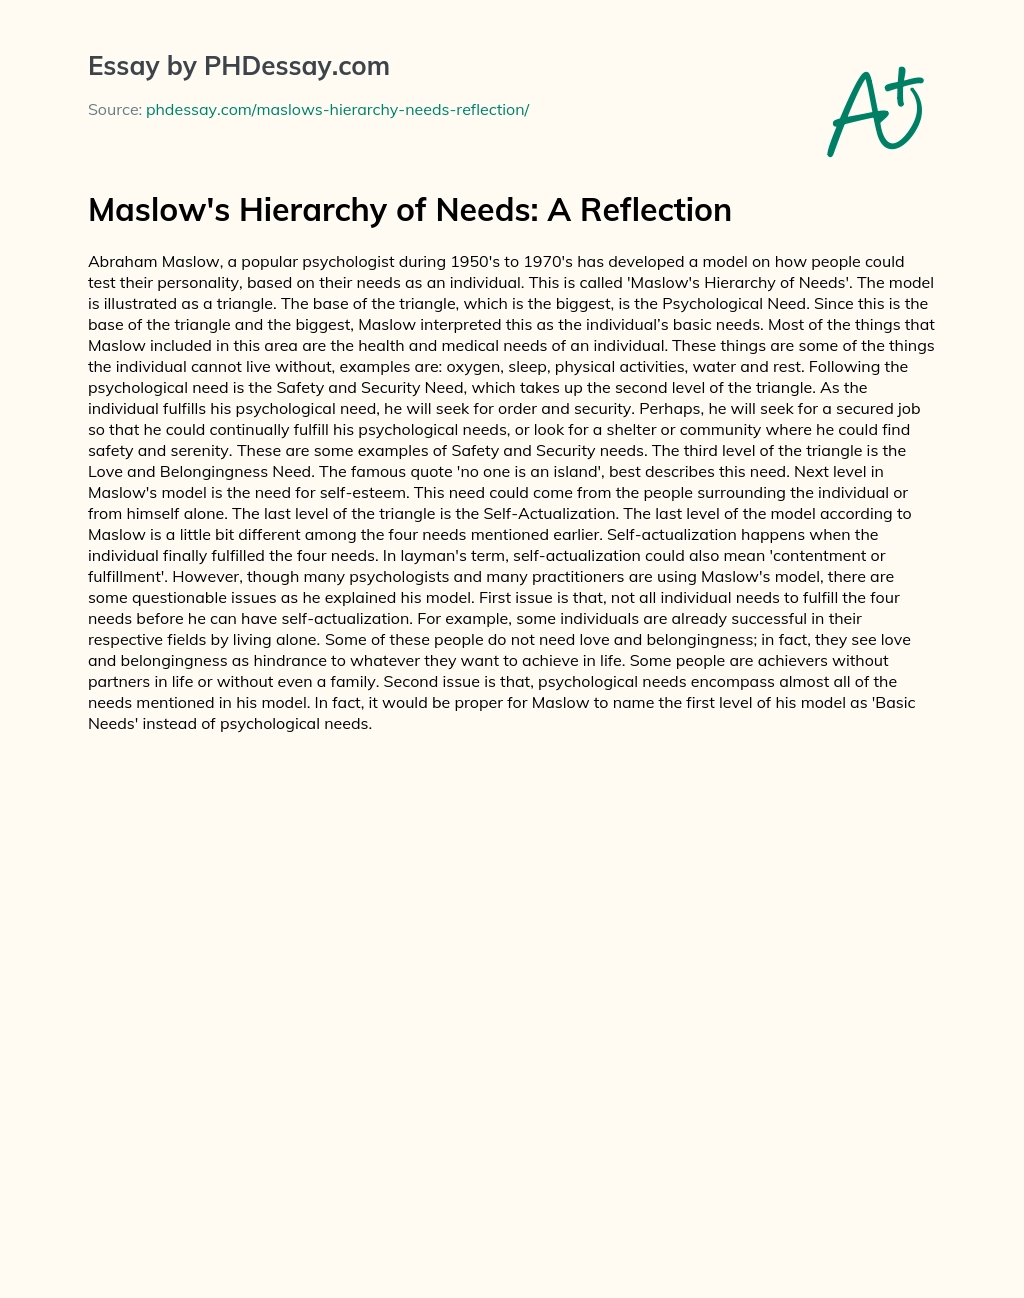 Maslow’s Hierarchy of Needs: A Reflection essay